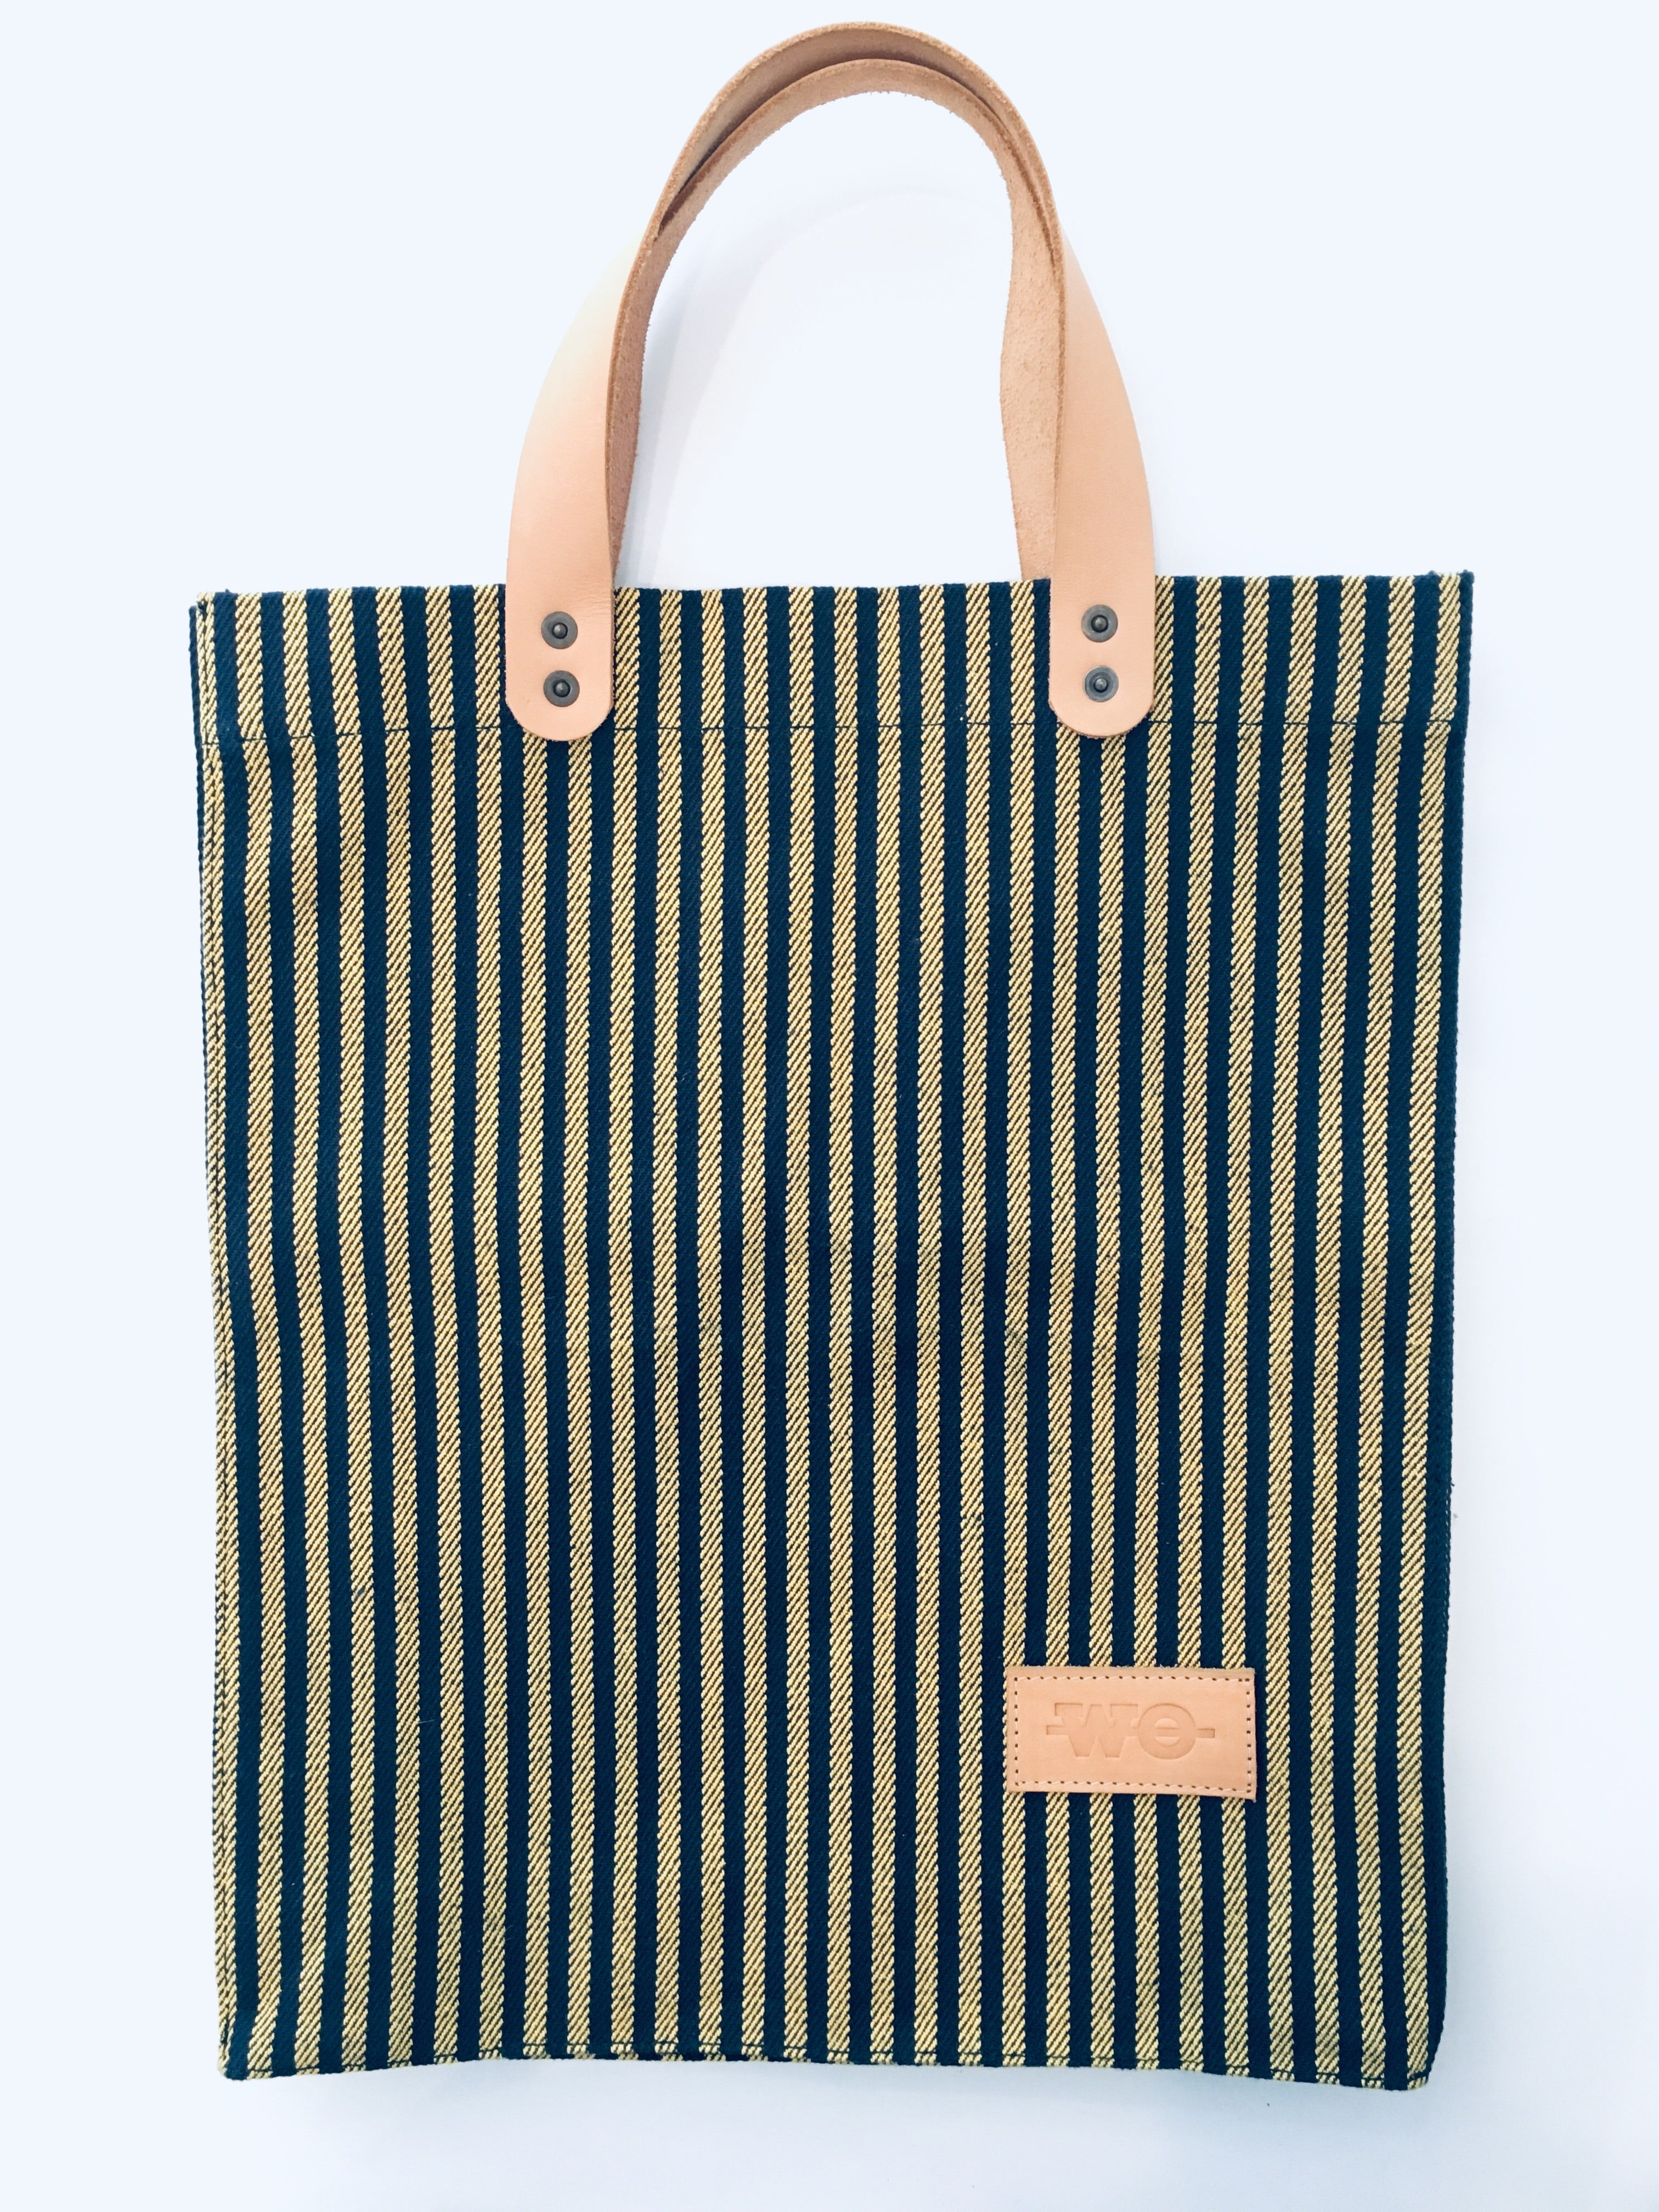 Striped Yellow and Navy Tote with Leather Handles